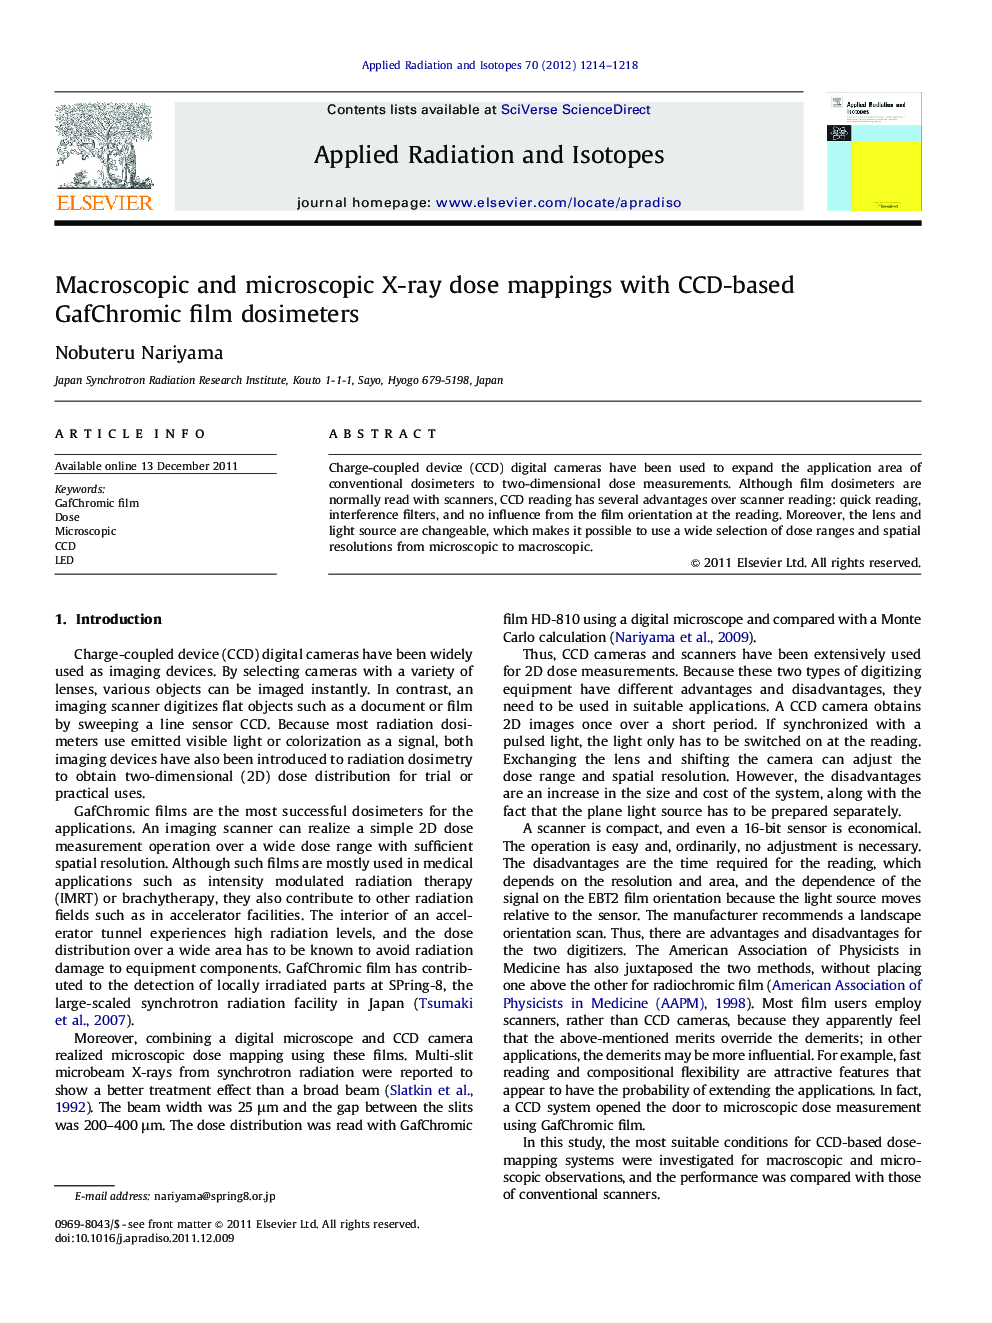 Macroscopic and microscopic X-ray dose mappings with CCD-based GafChromic film dosimeters